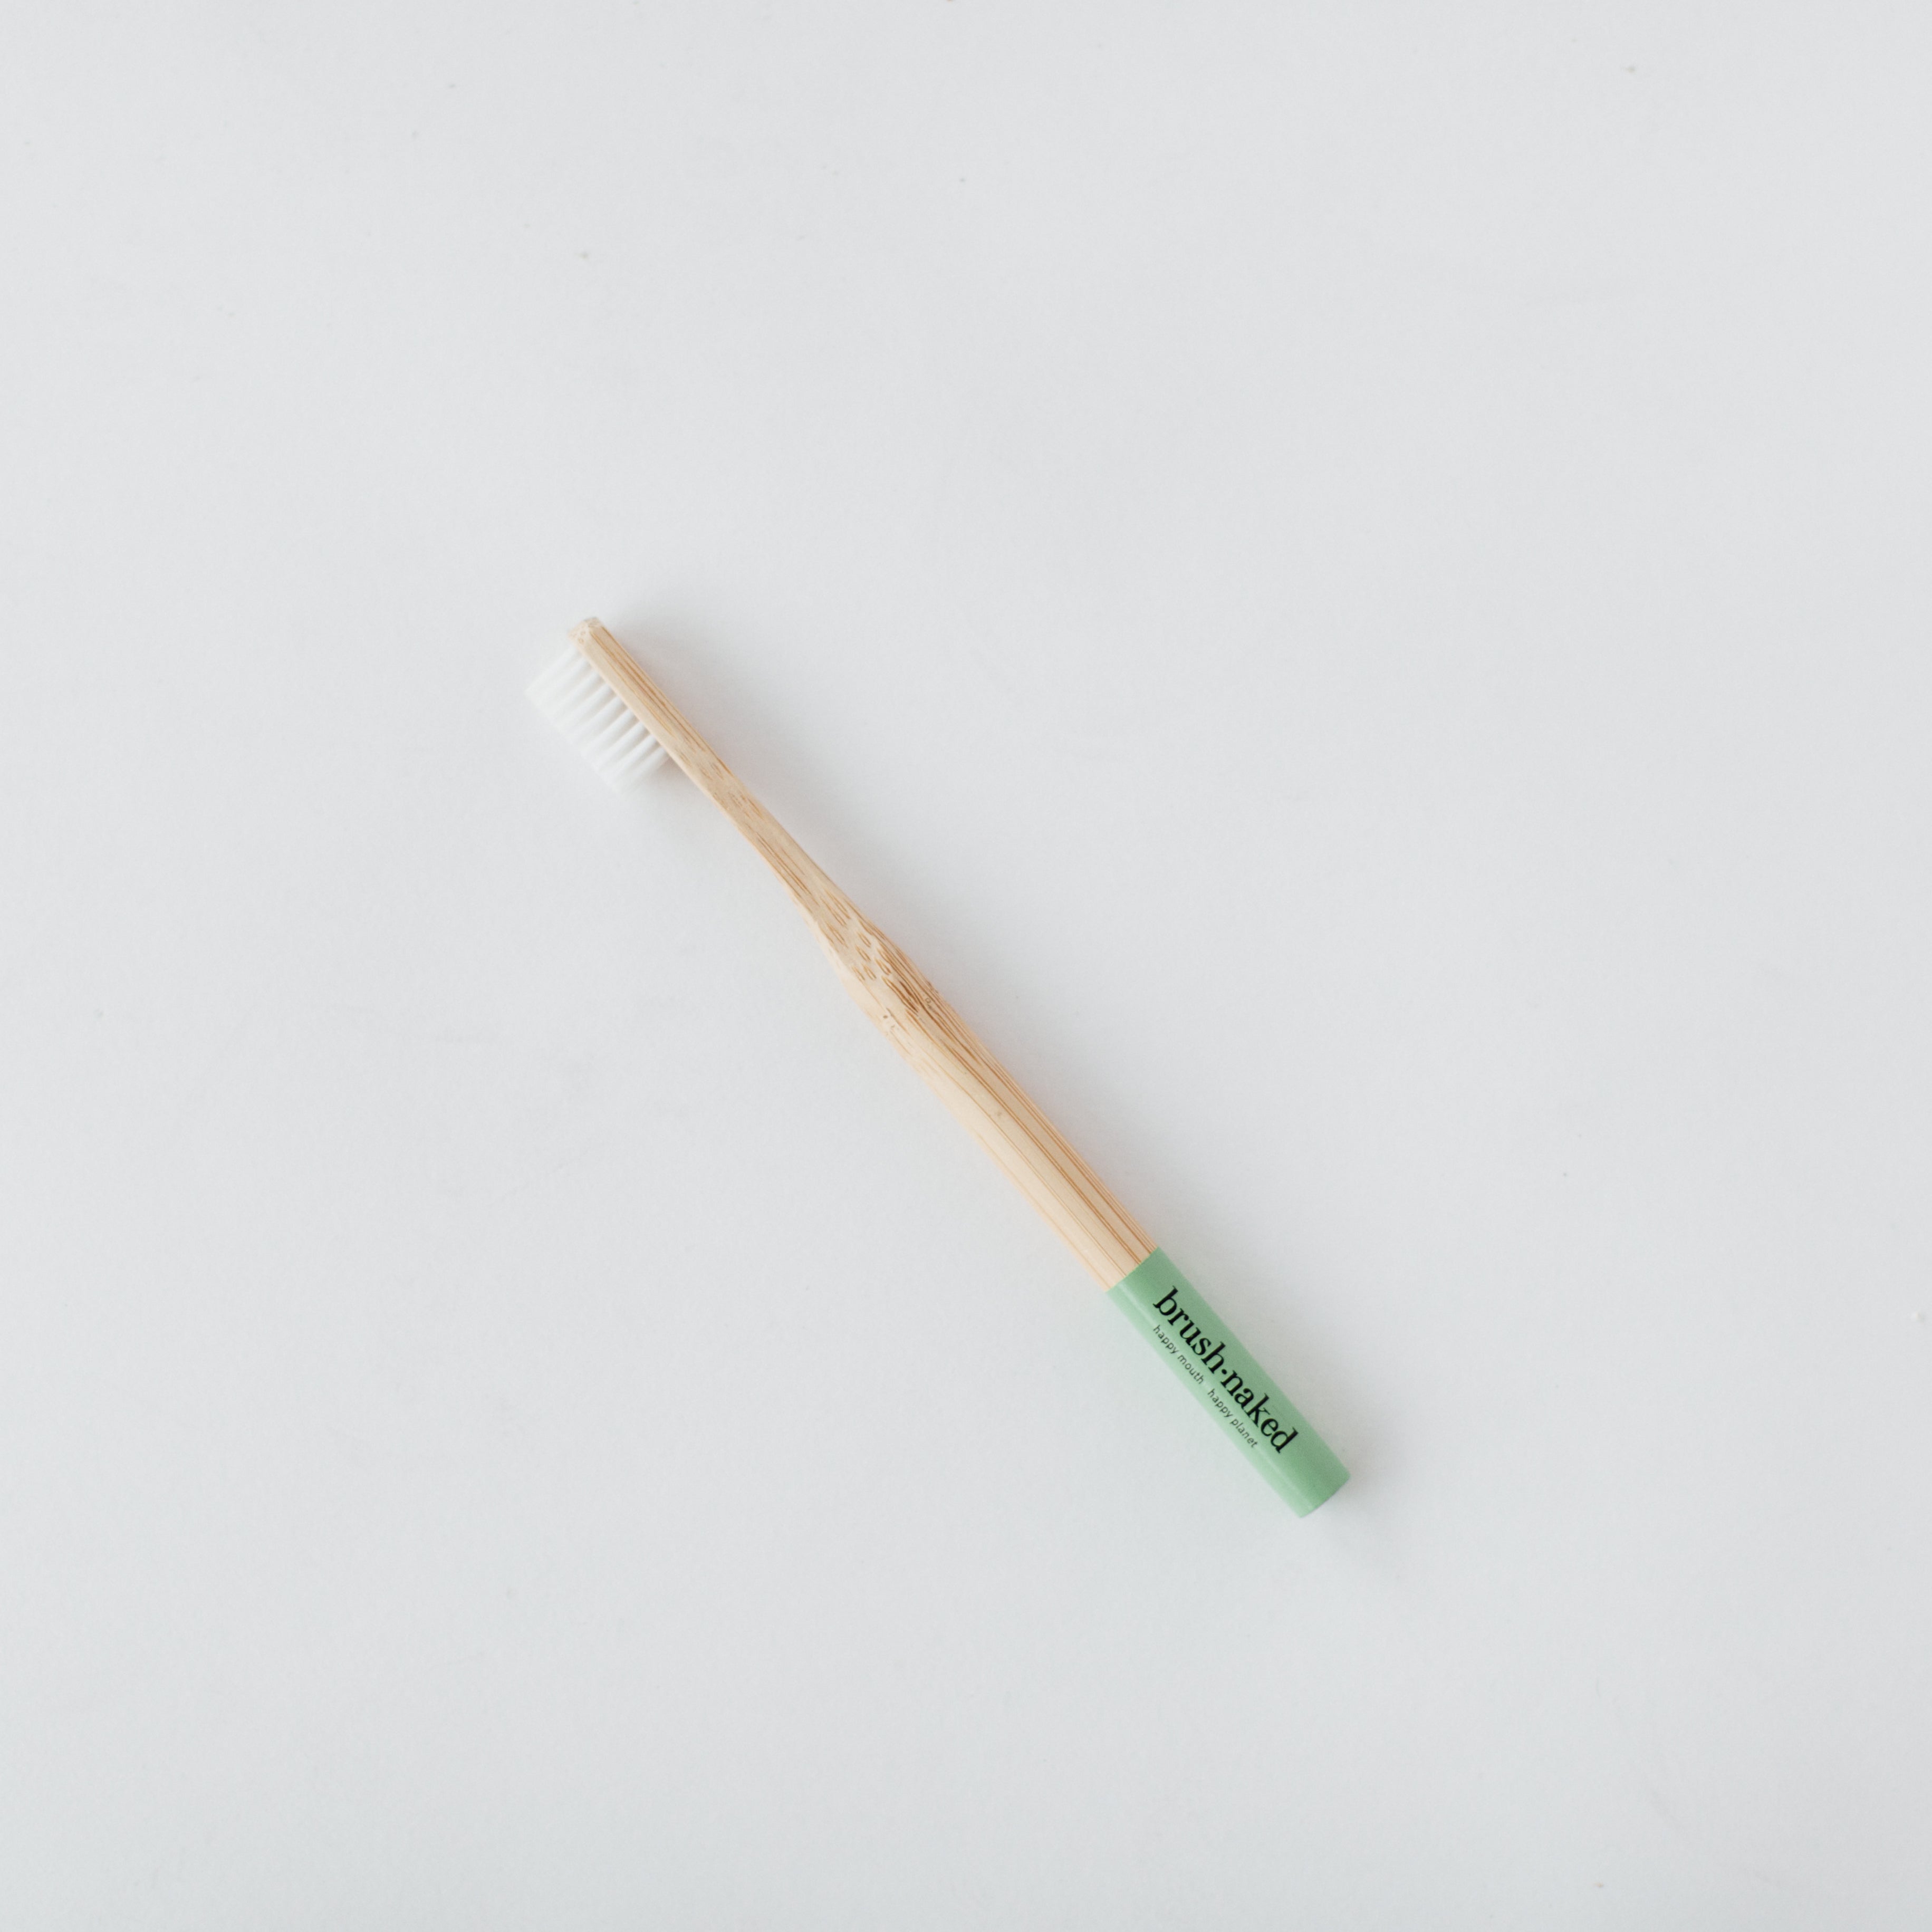 Adult Toothbrush - Green